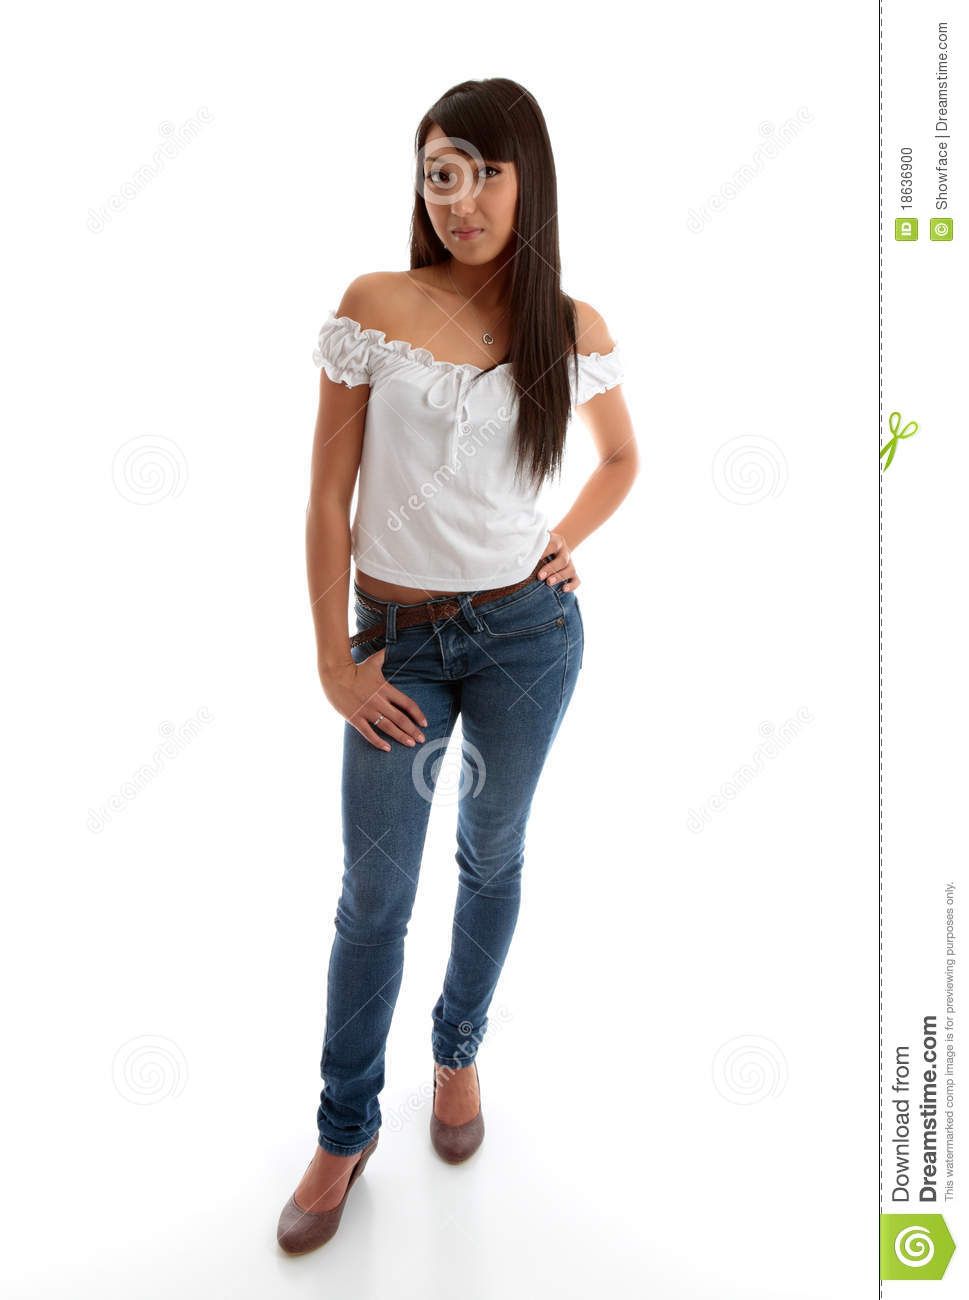 best of Wearing jeans Images young of girls